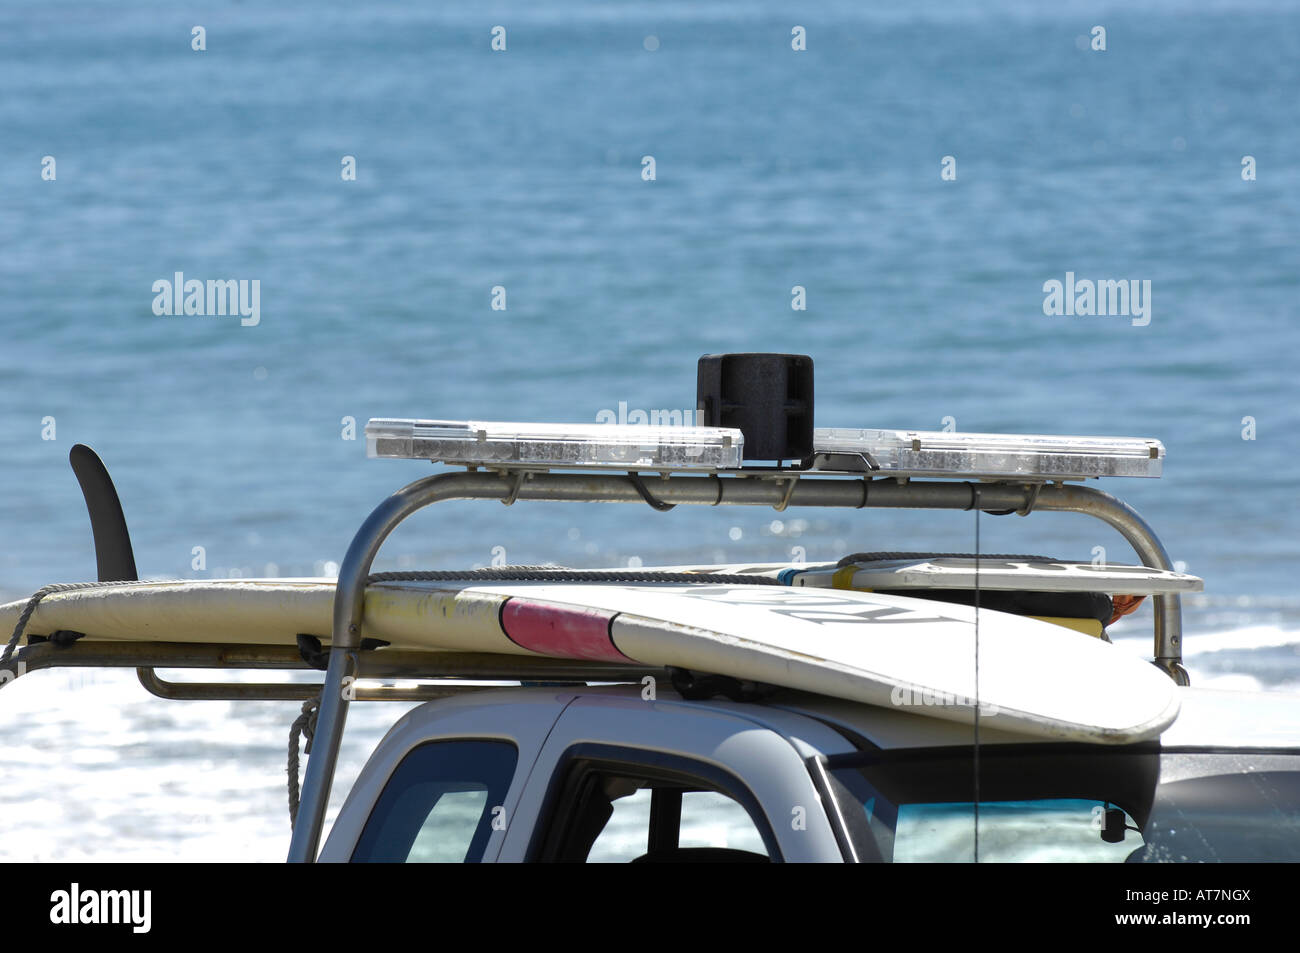 LED lights on an emergency vehicle allow first responders to be highly visible, Lifeguard rescue truck with surf board. Stock Photo